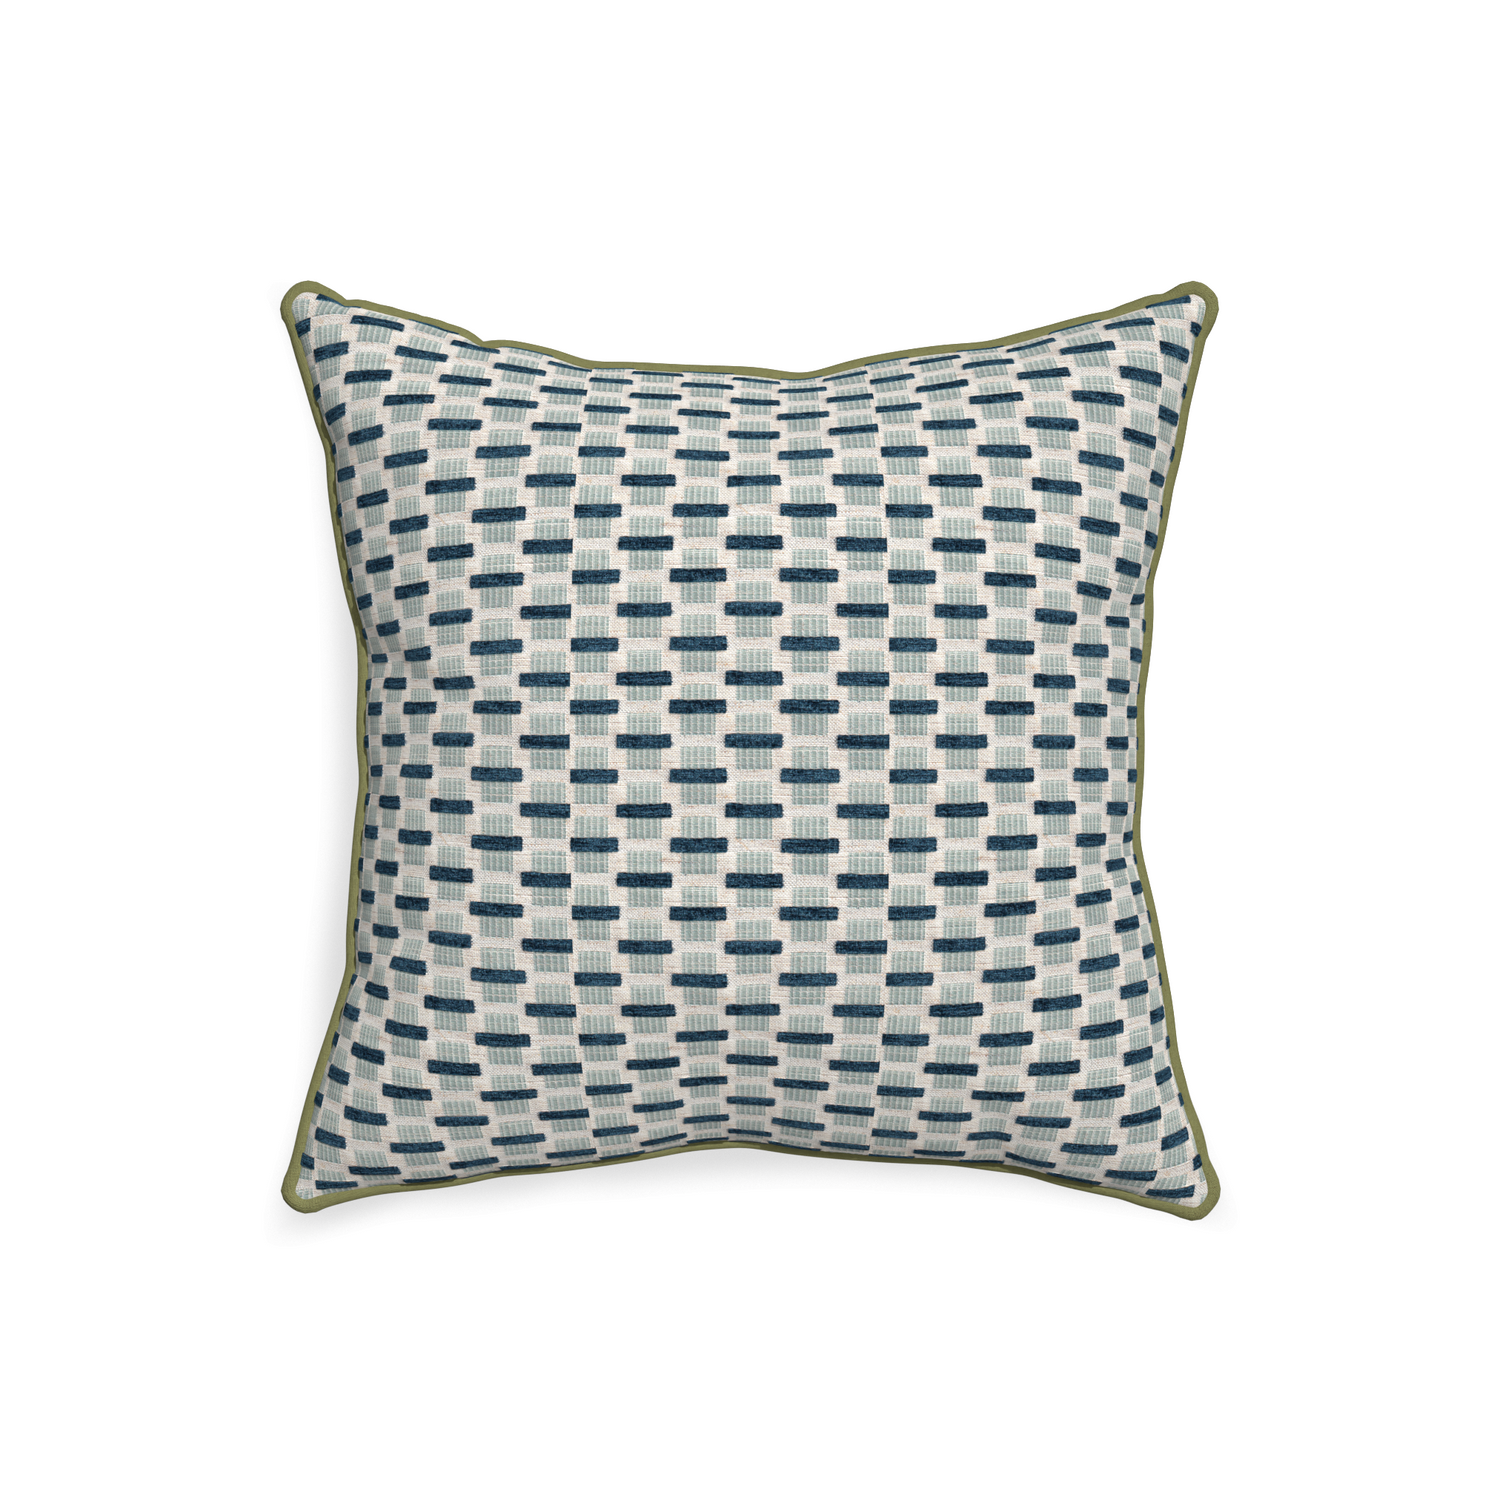 20-square willow amalfi custom blue geometric chenillepillow with moss piping on white background